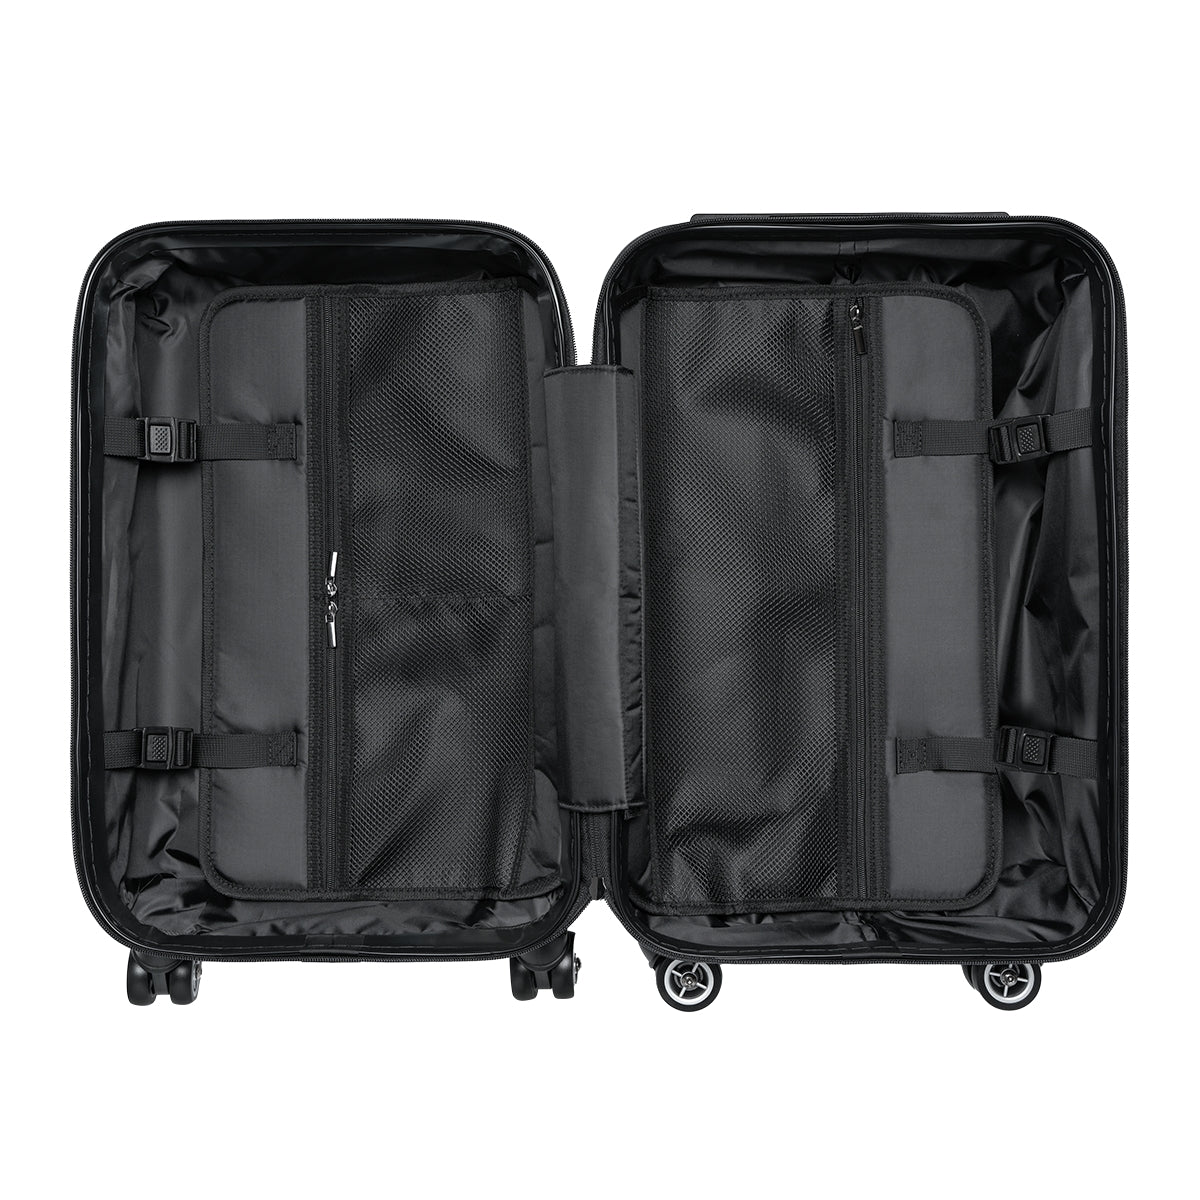 CARRY ON SUITCASES WITH WHEELS BY RTZIRA, CABIN SUITCASE, CARRY ON LUGGAGE, HARD SHELL TSL COMBINATION LOCK, SPINNER